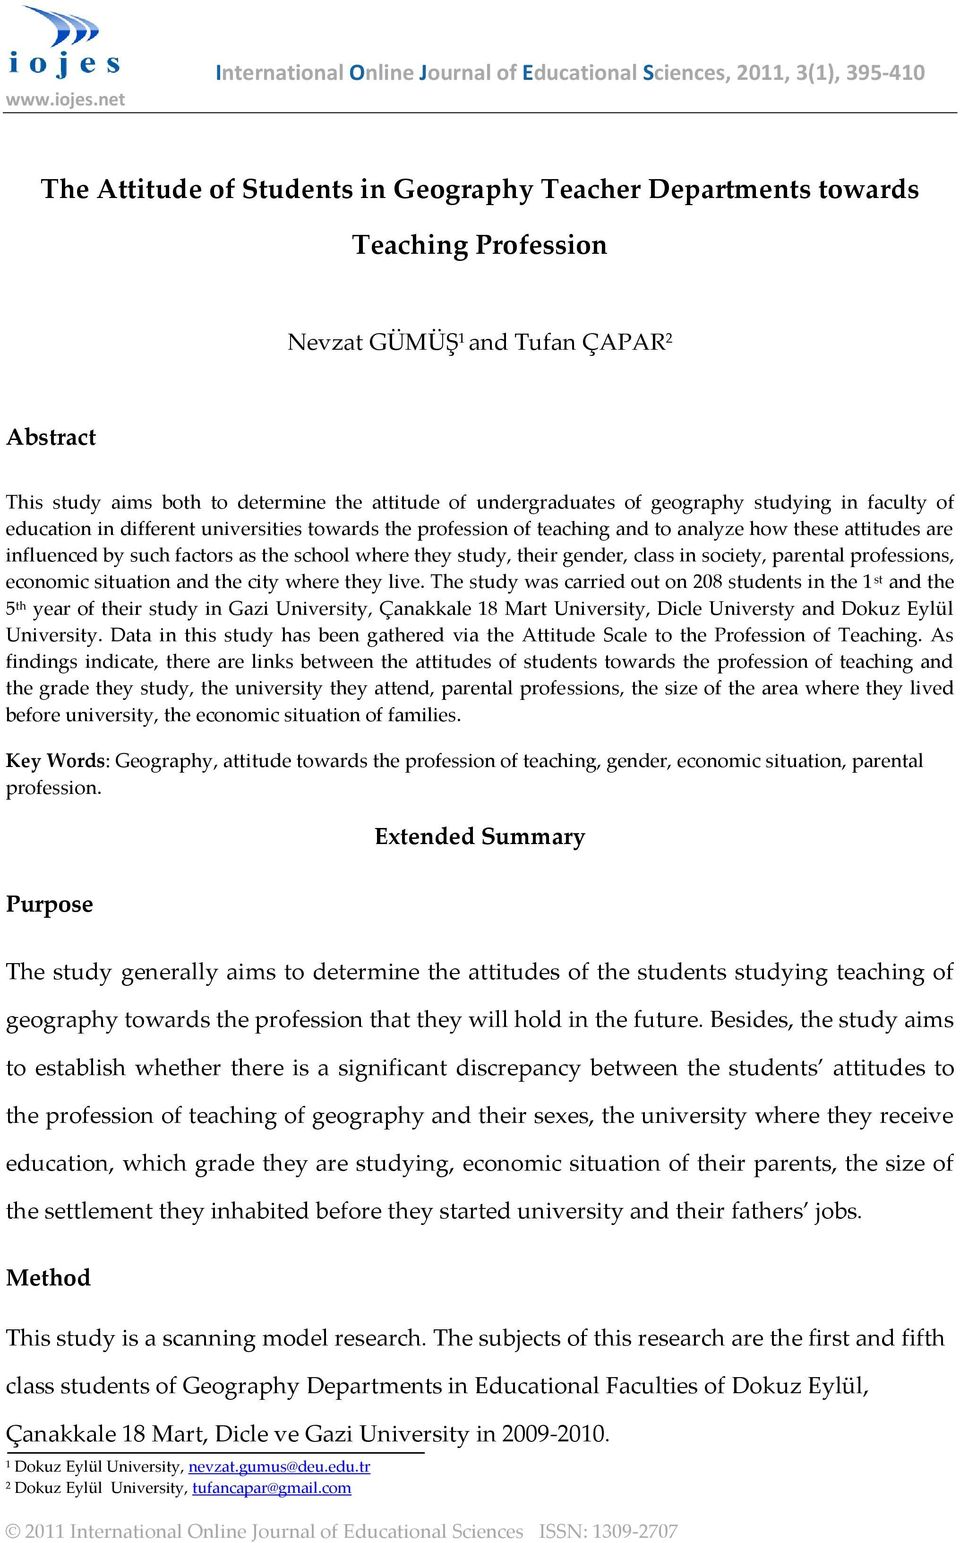 Abstract This study aims both to determine the attitude of undergraduates of geography studying in faculty of education in different universities towards the profession of teaching and to analyze how